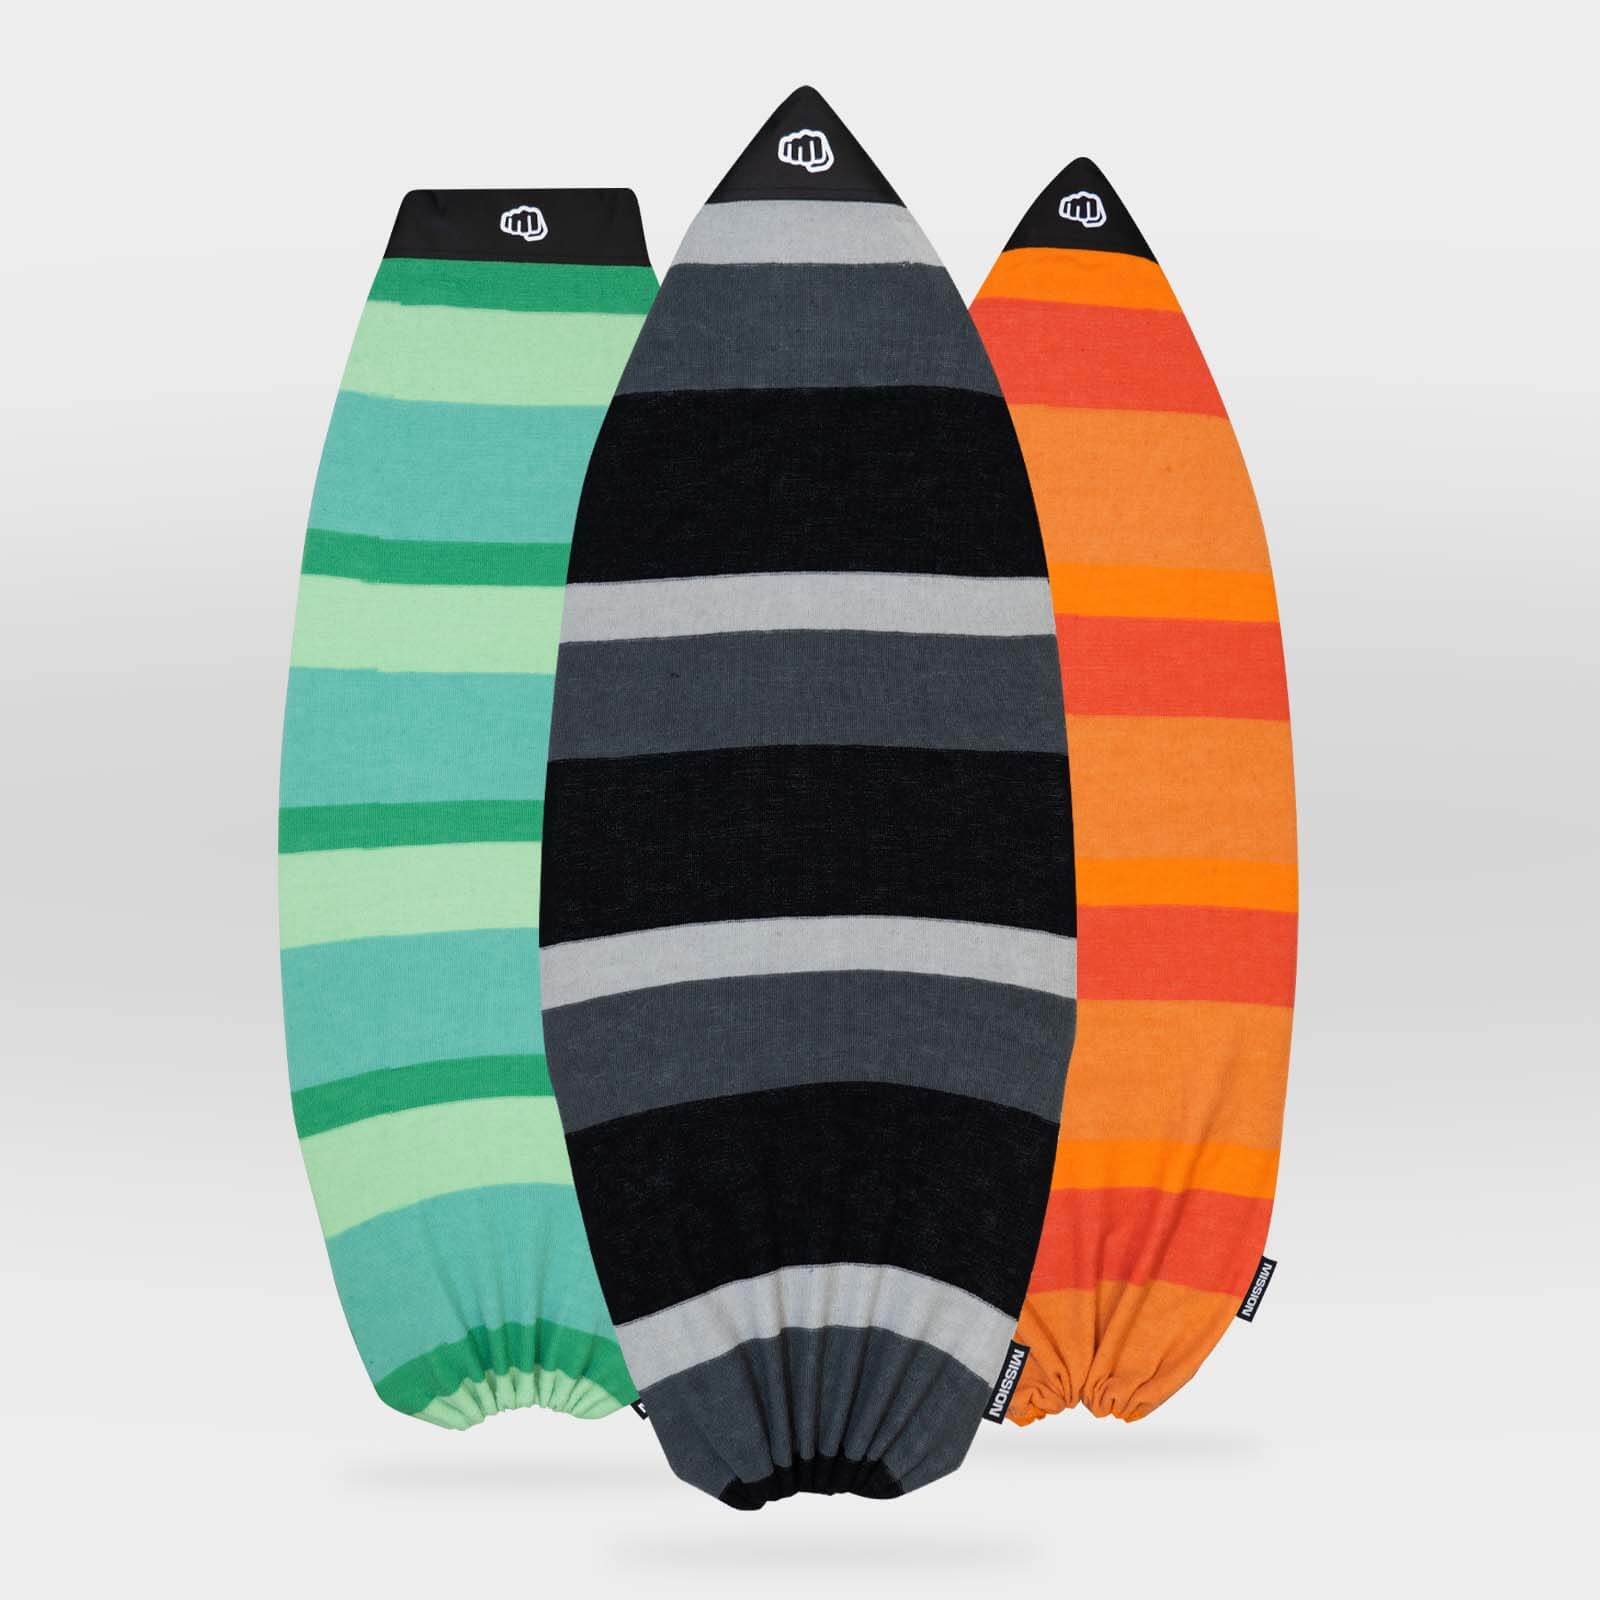 MISSION Classic Board Socks in various colors